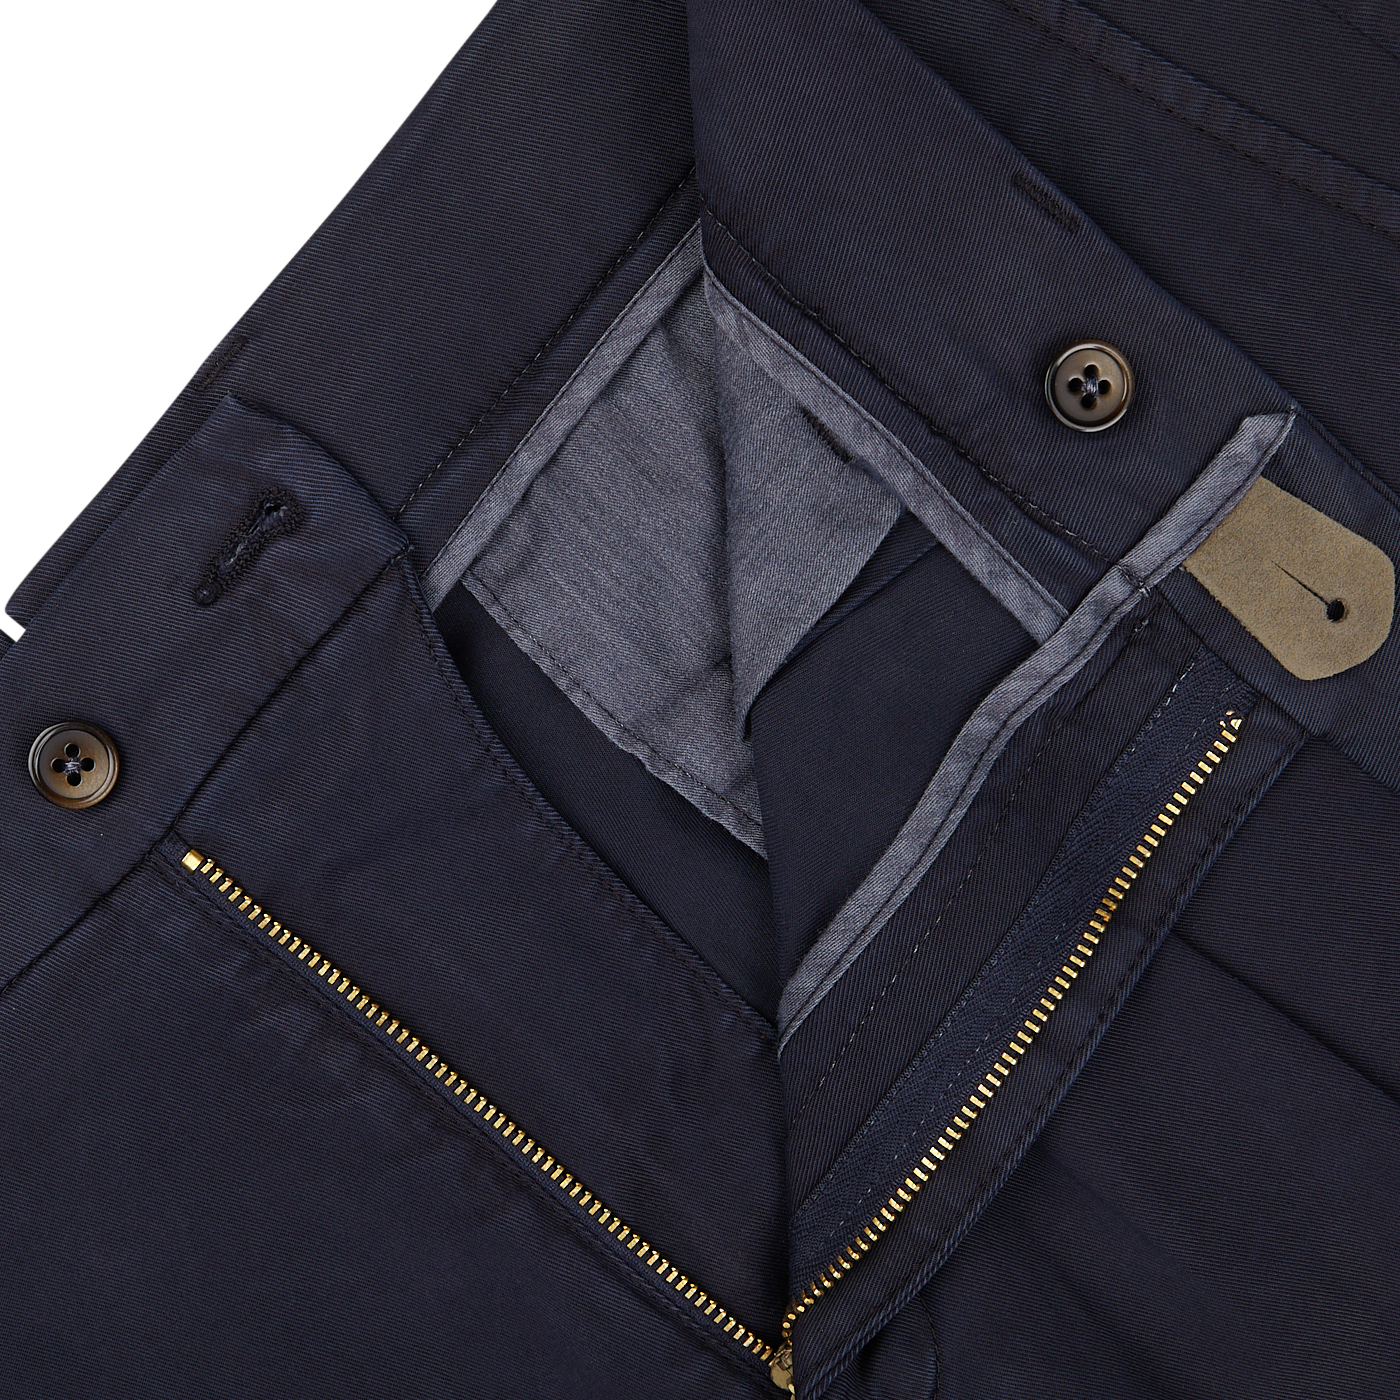 Dark Berwich jacket with zipper, button details, and a wider fit.